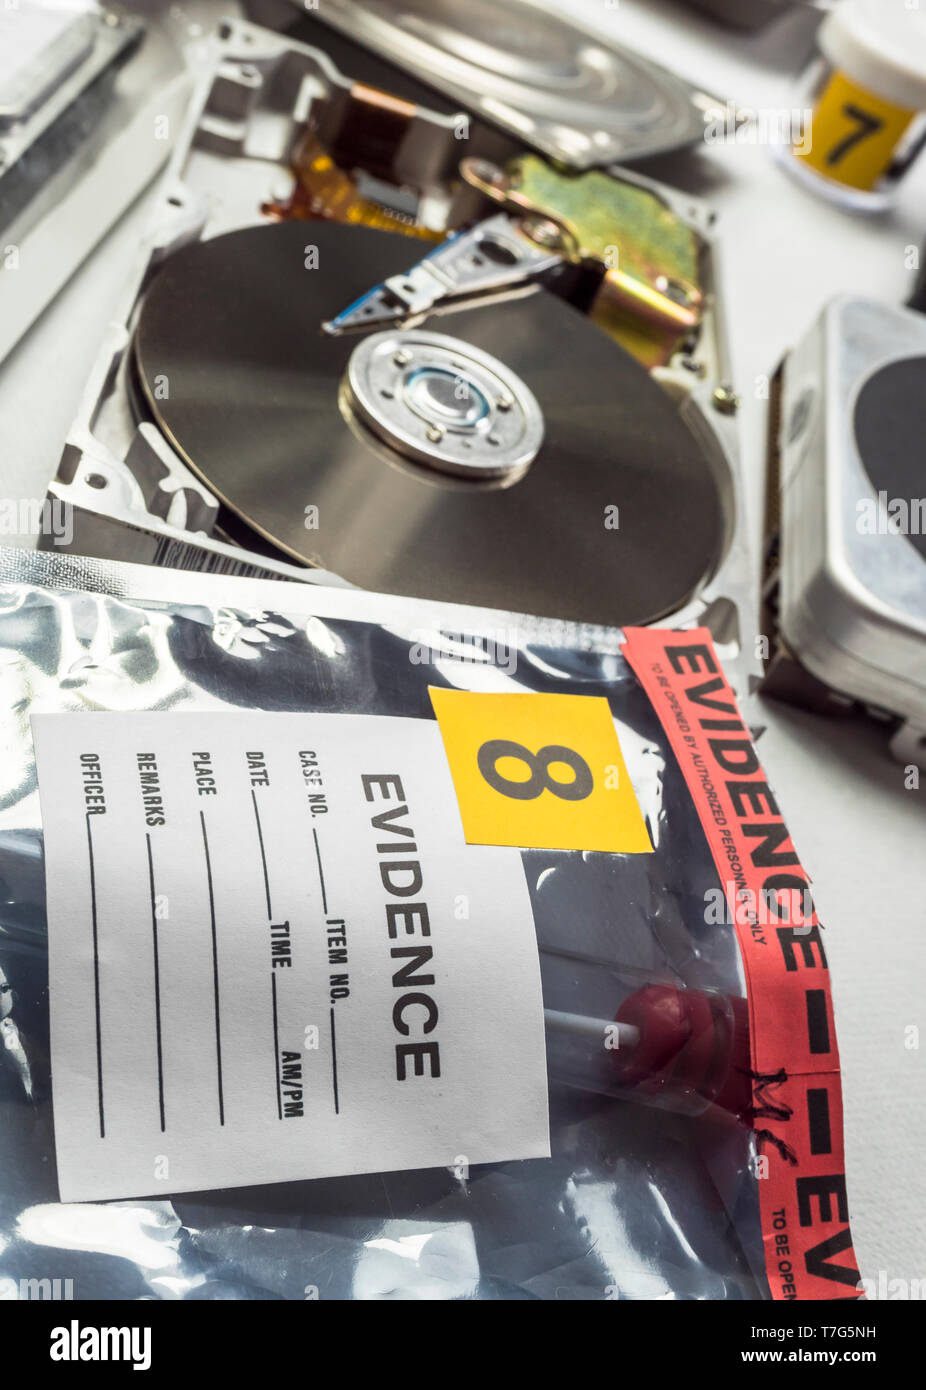 Police expert examines hard drive in search of evidence, conceptual image Stock Photo